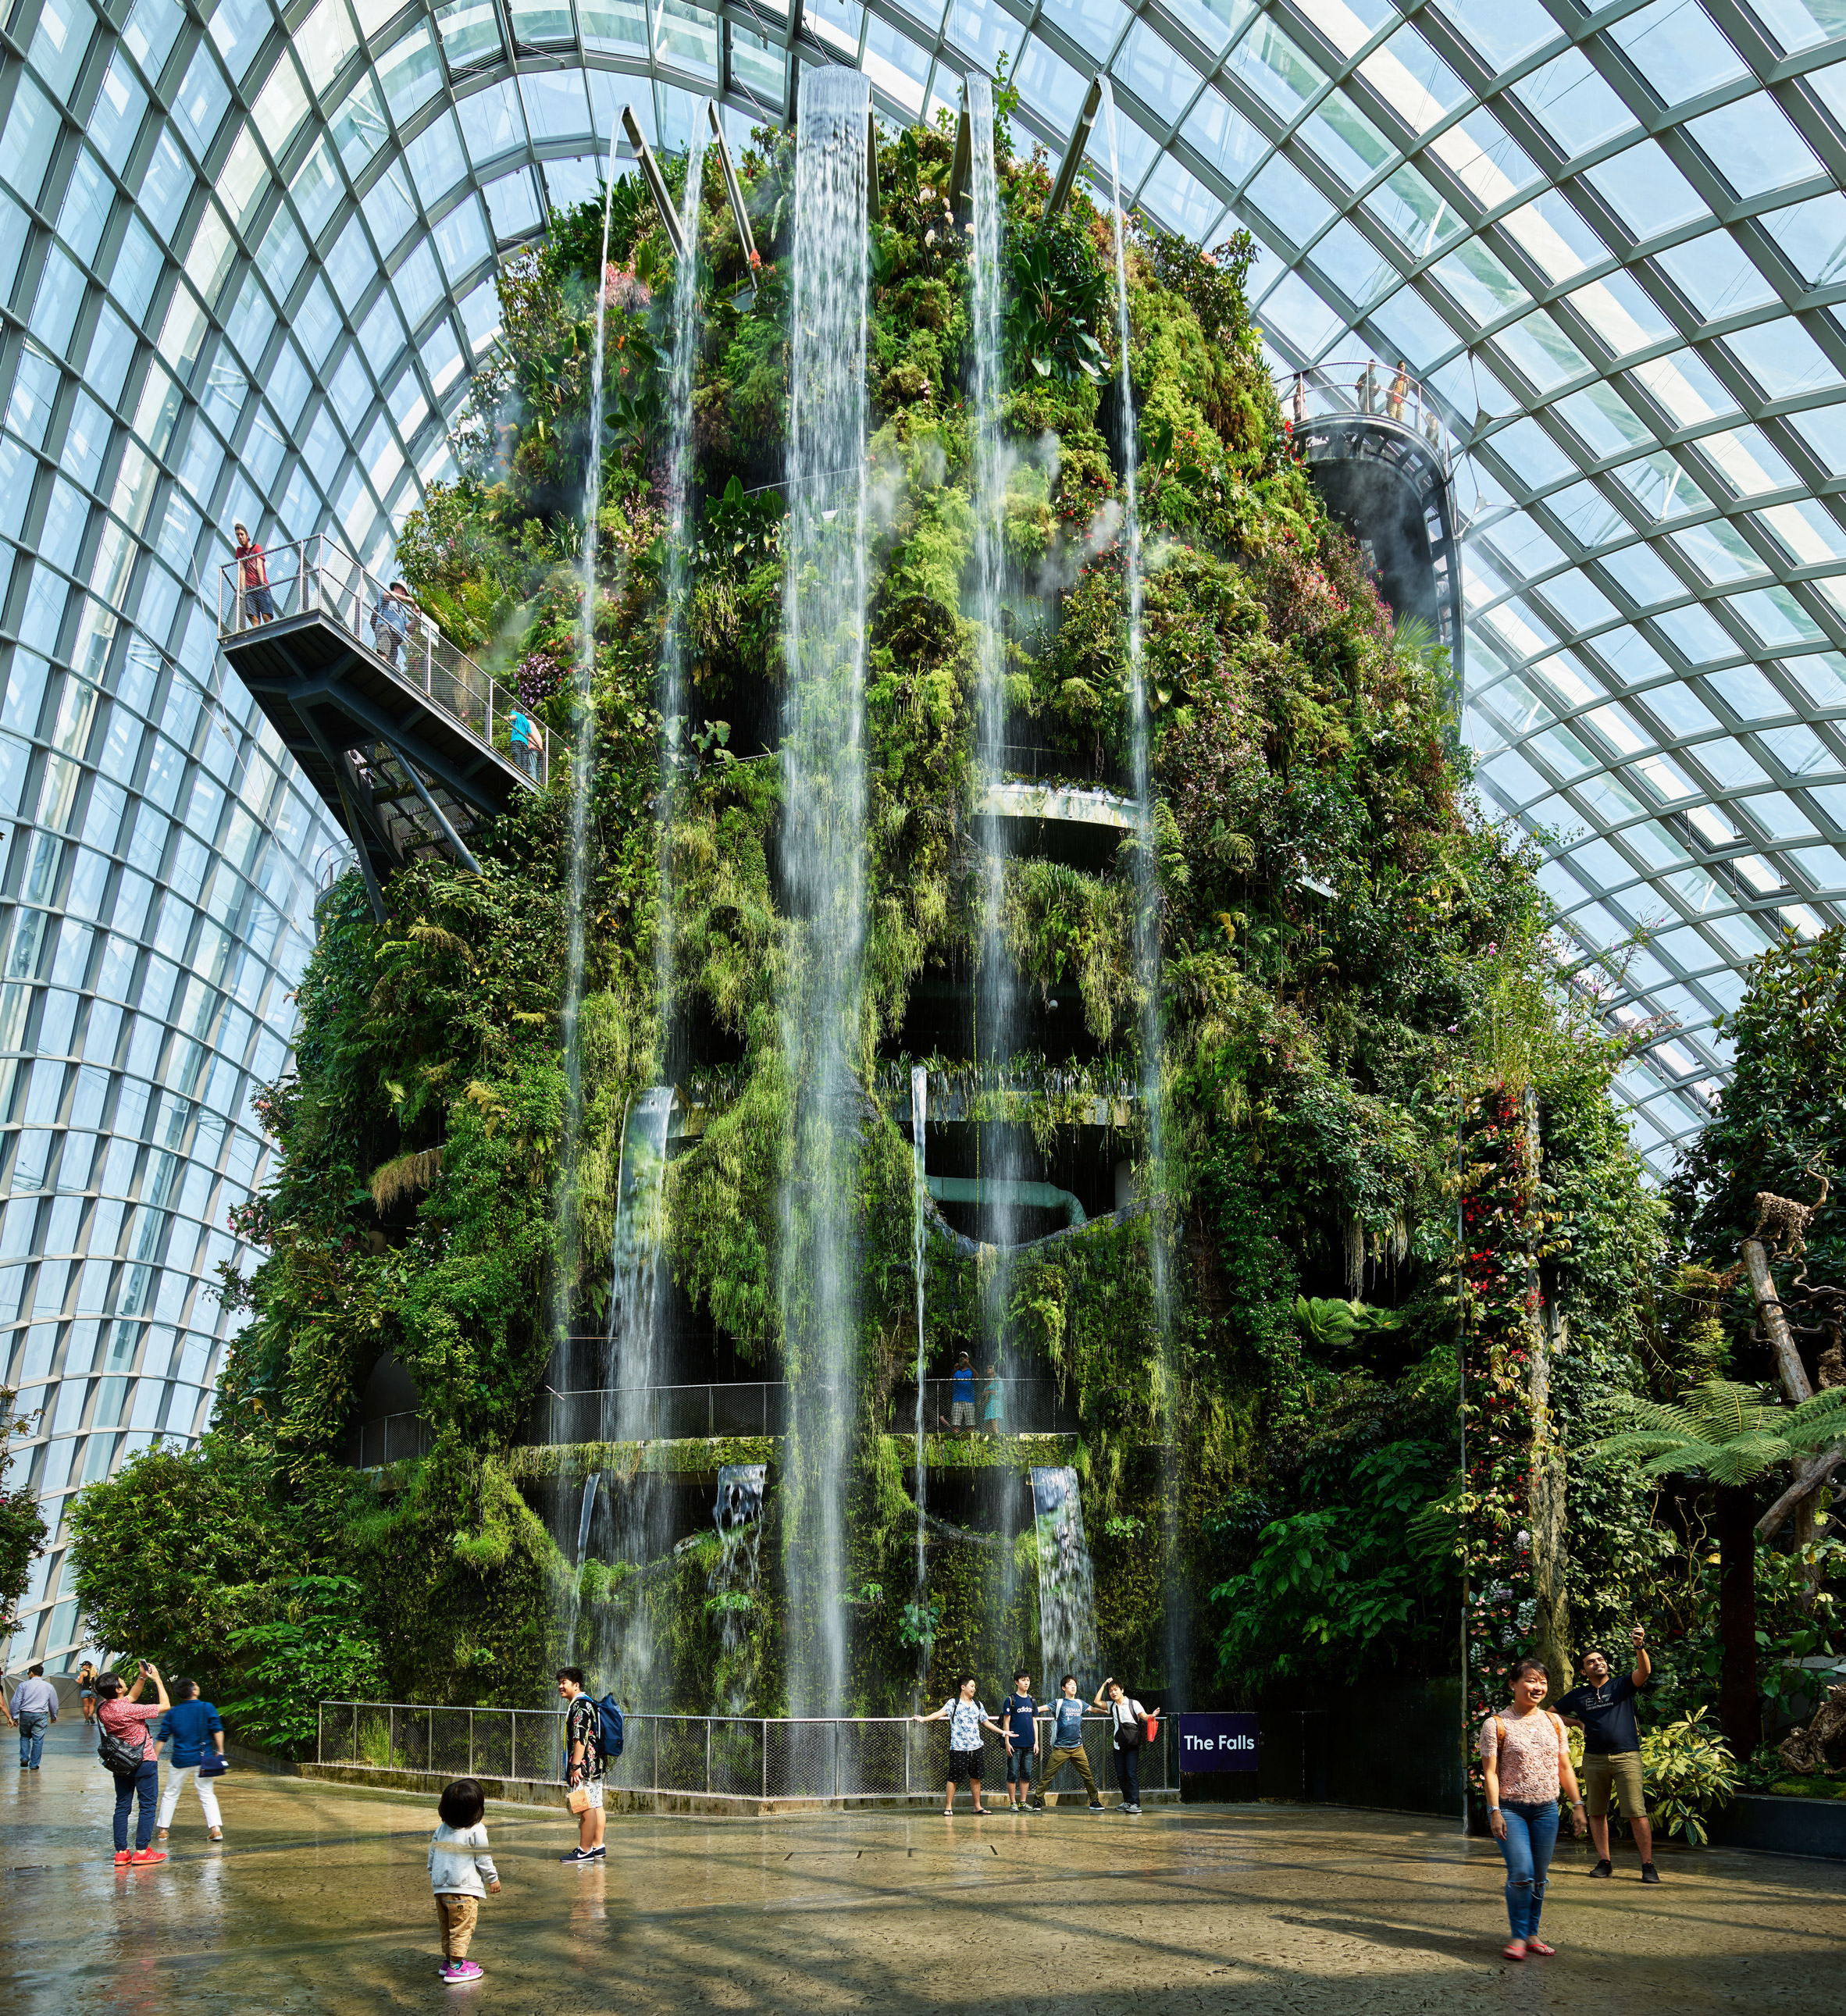 Waterfall architecture: Gardens by the Bay